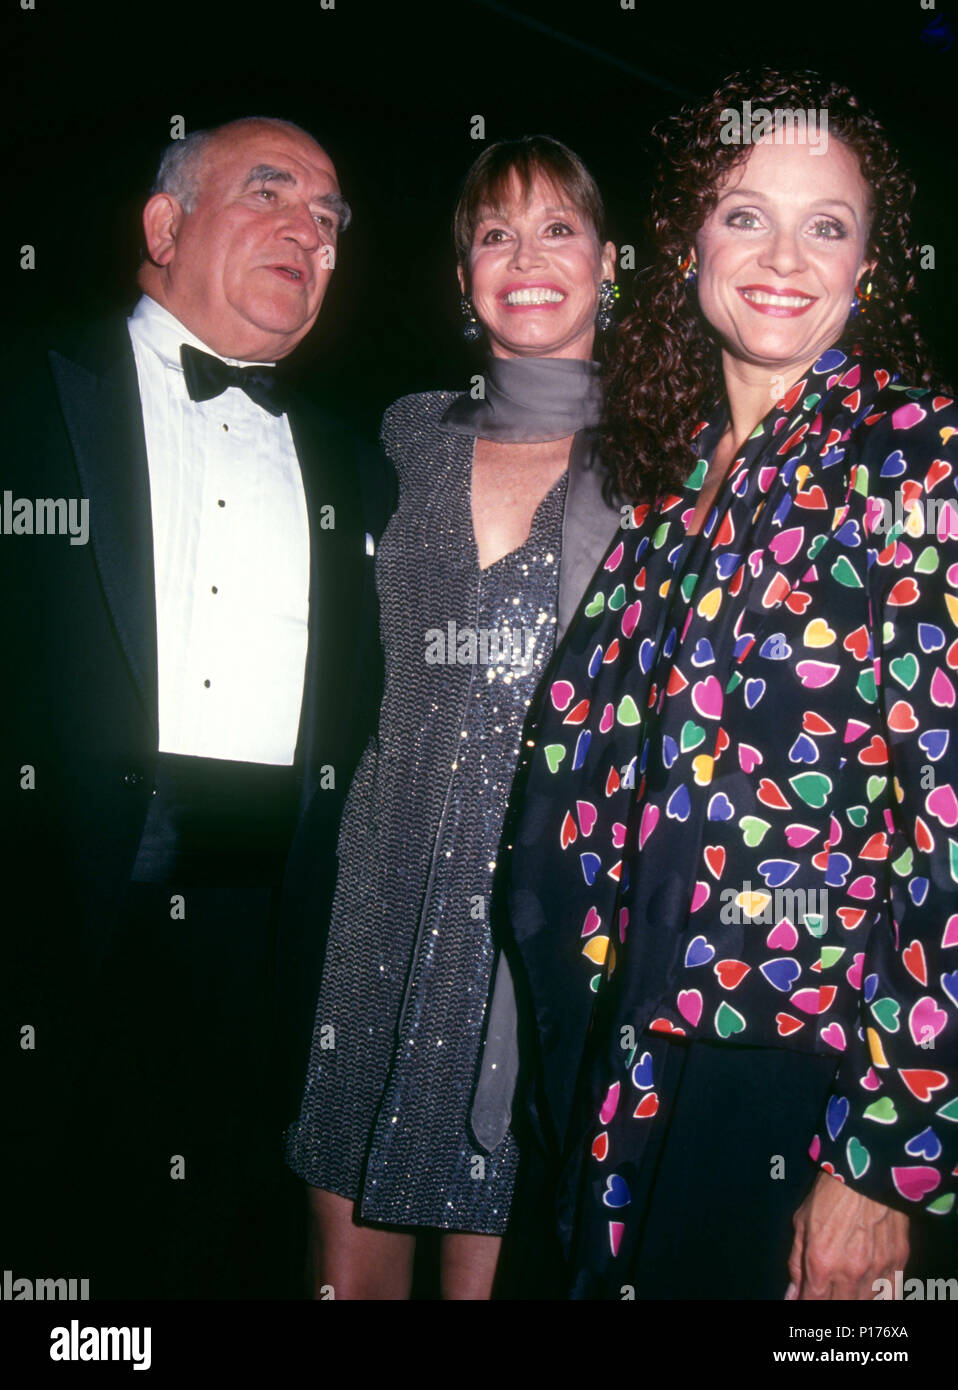 BEVERLY HILLS, CA - OCTOBER 04: (L-R) Actor Ed Asner, actress/honoree Mary Tyler Moore and actress Valerie Harper attend the Los Angeles Chapter Juvenile Diabetes Research Foundation International Presents the First Annual Promise Ball on October 4, 1991 at the Beverly Hilton Hotel in Beverly Hills, California. Photo by Barry King/Alamy Stock Photo Stock Photo